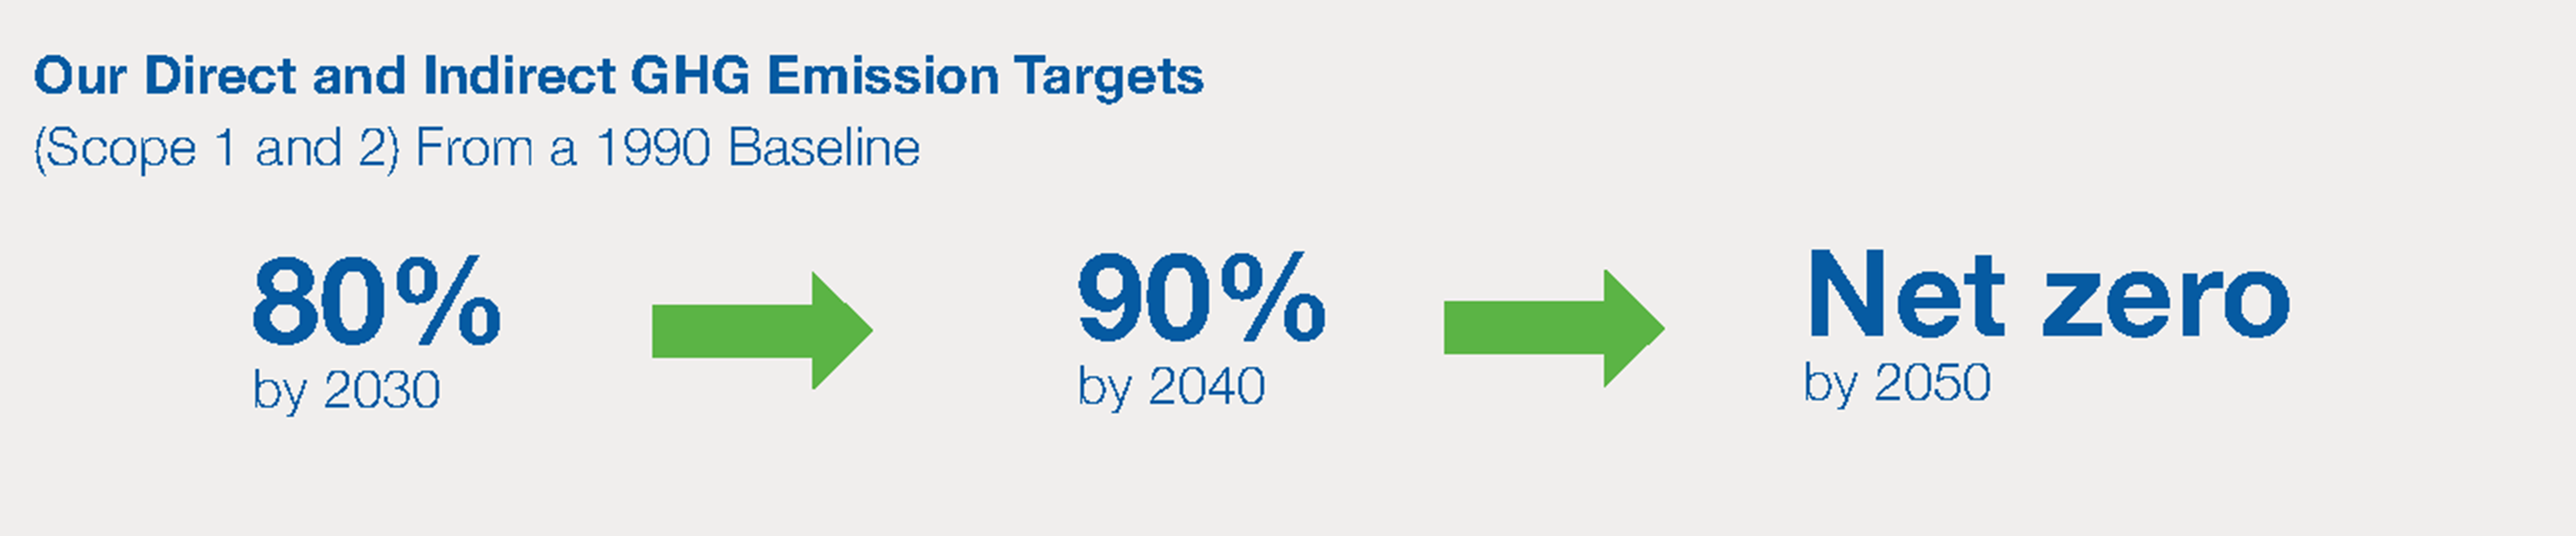 Our Direct and Indirect GHG Emission Targets